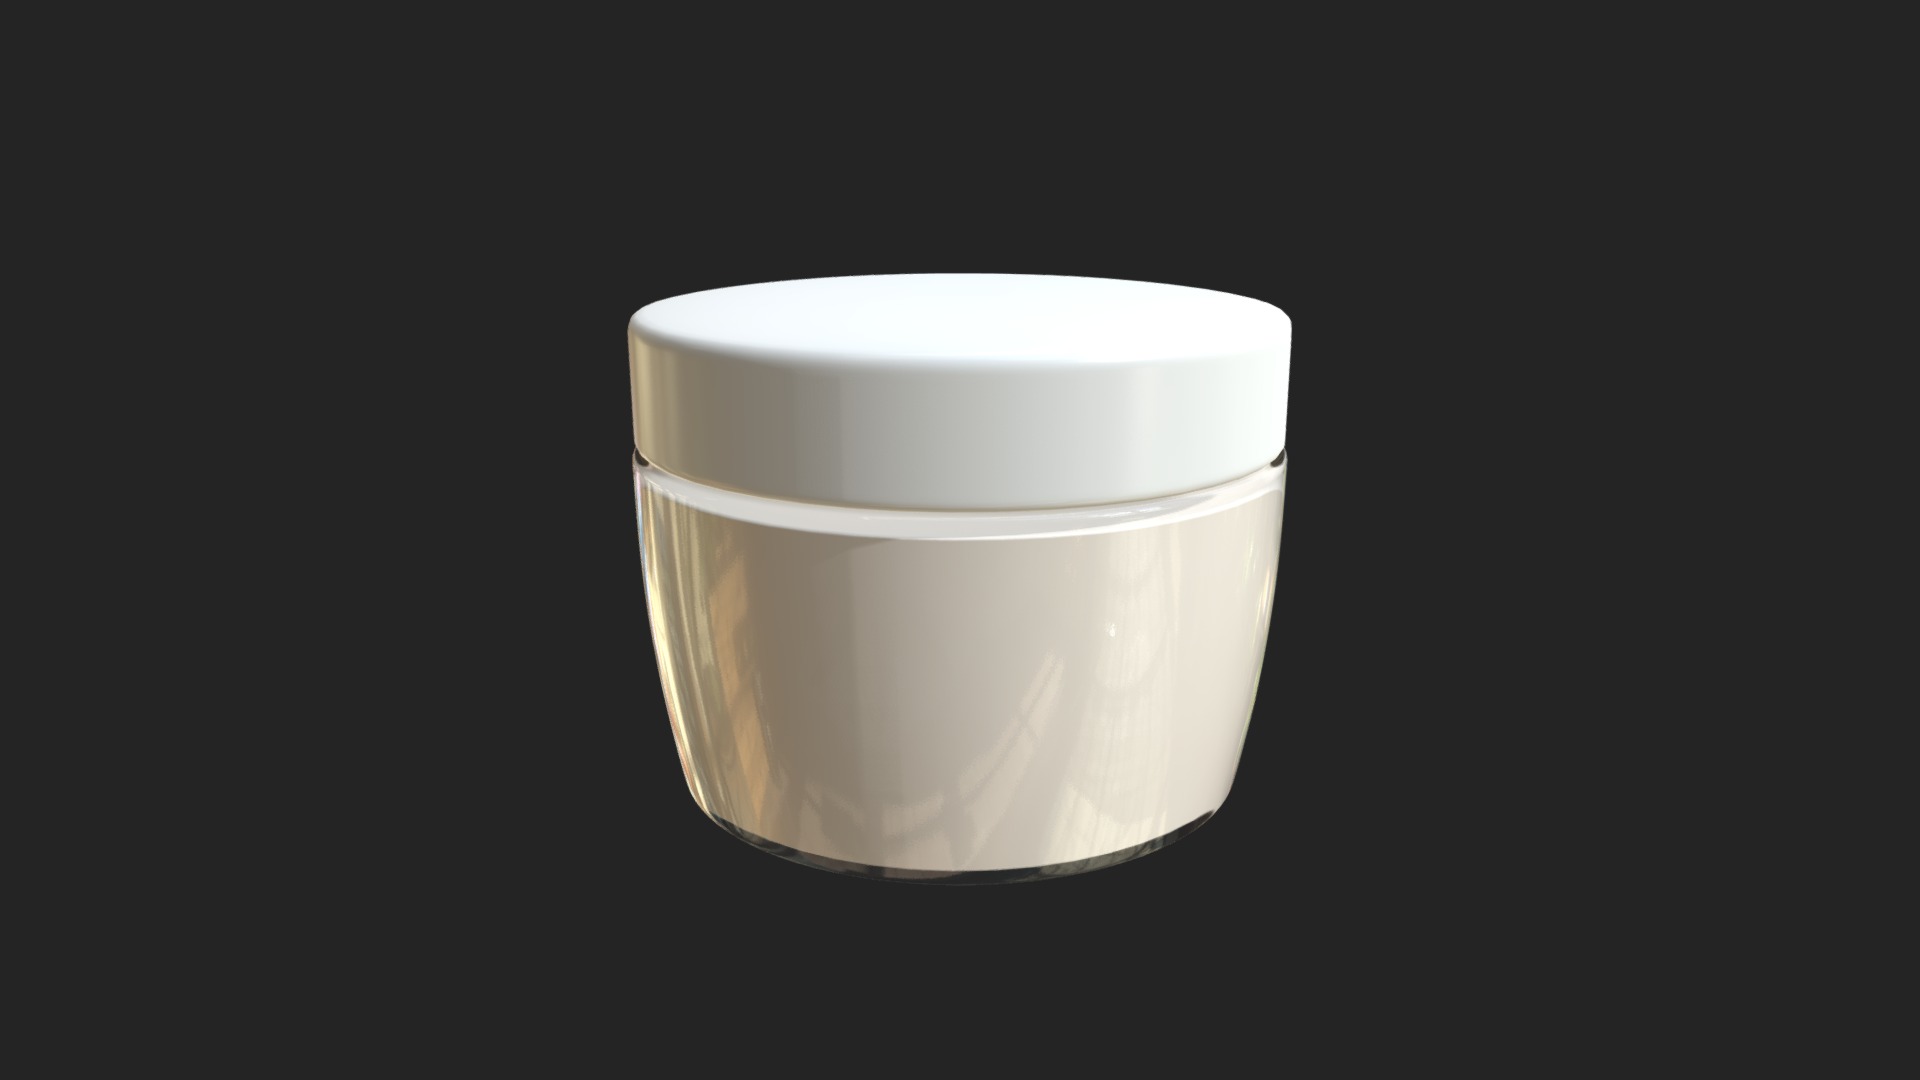 3D model Face cream jar - This is a 3D model of the Face cream jar. The 3D model is about a white cup with a lid.